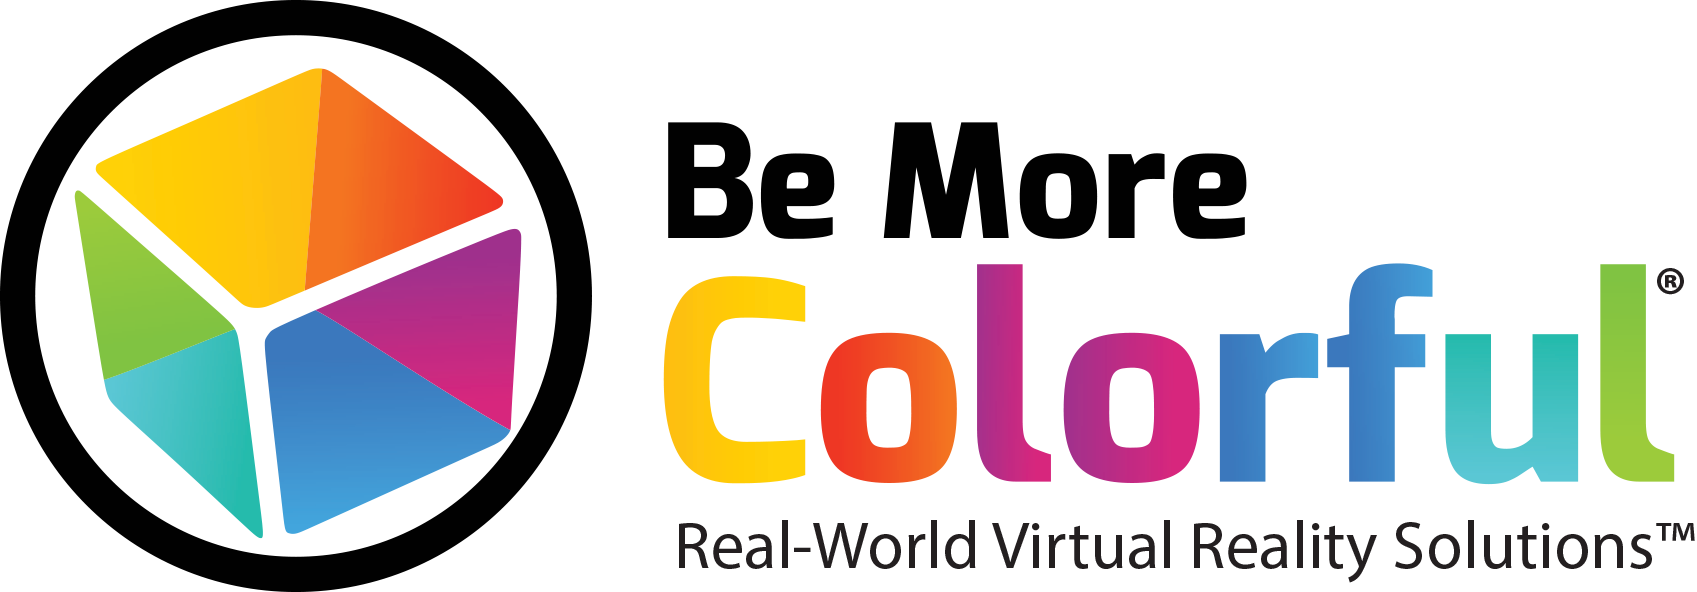 Be More Colorful and Cleanbox Technology Partnership